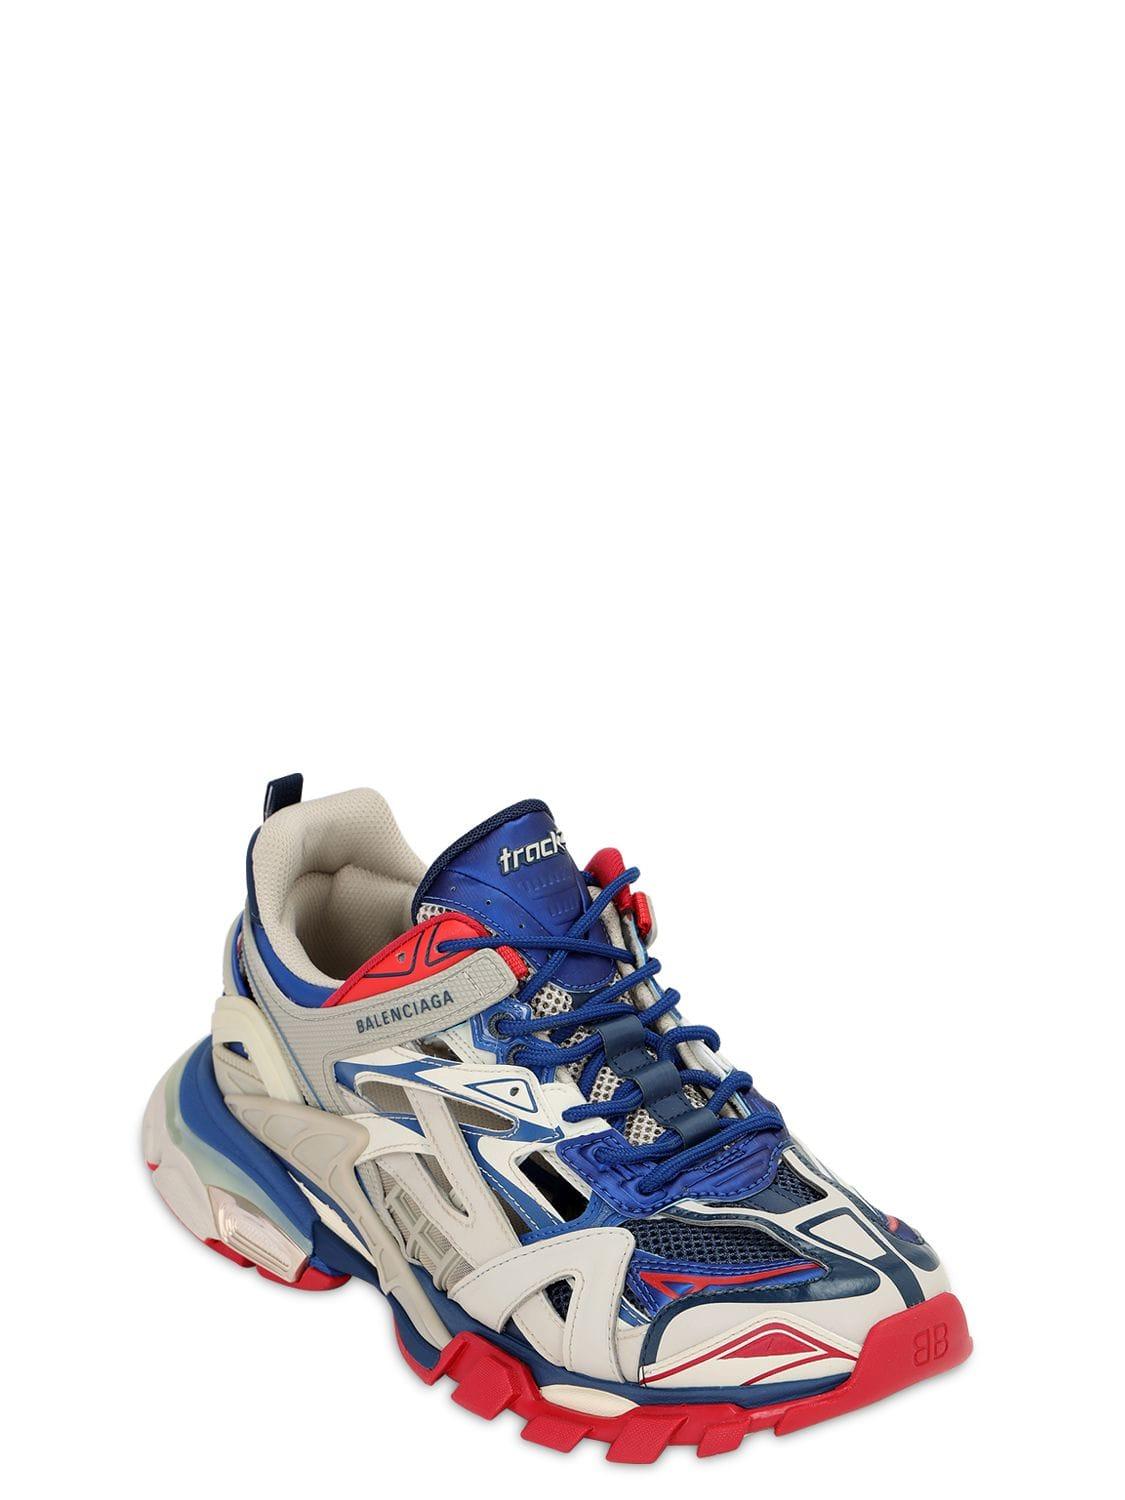 Balenciaga Rubber Track 2.0 Leather And Mesh Trainers in Blue for Men | Lyst